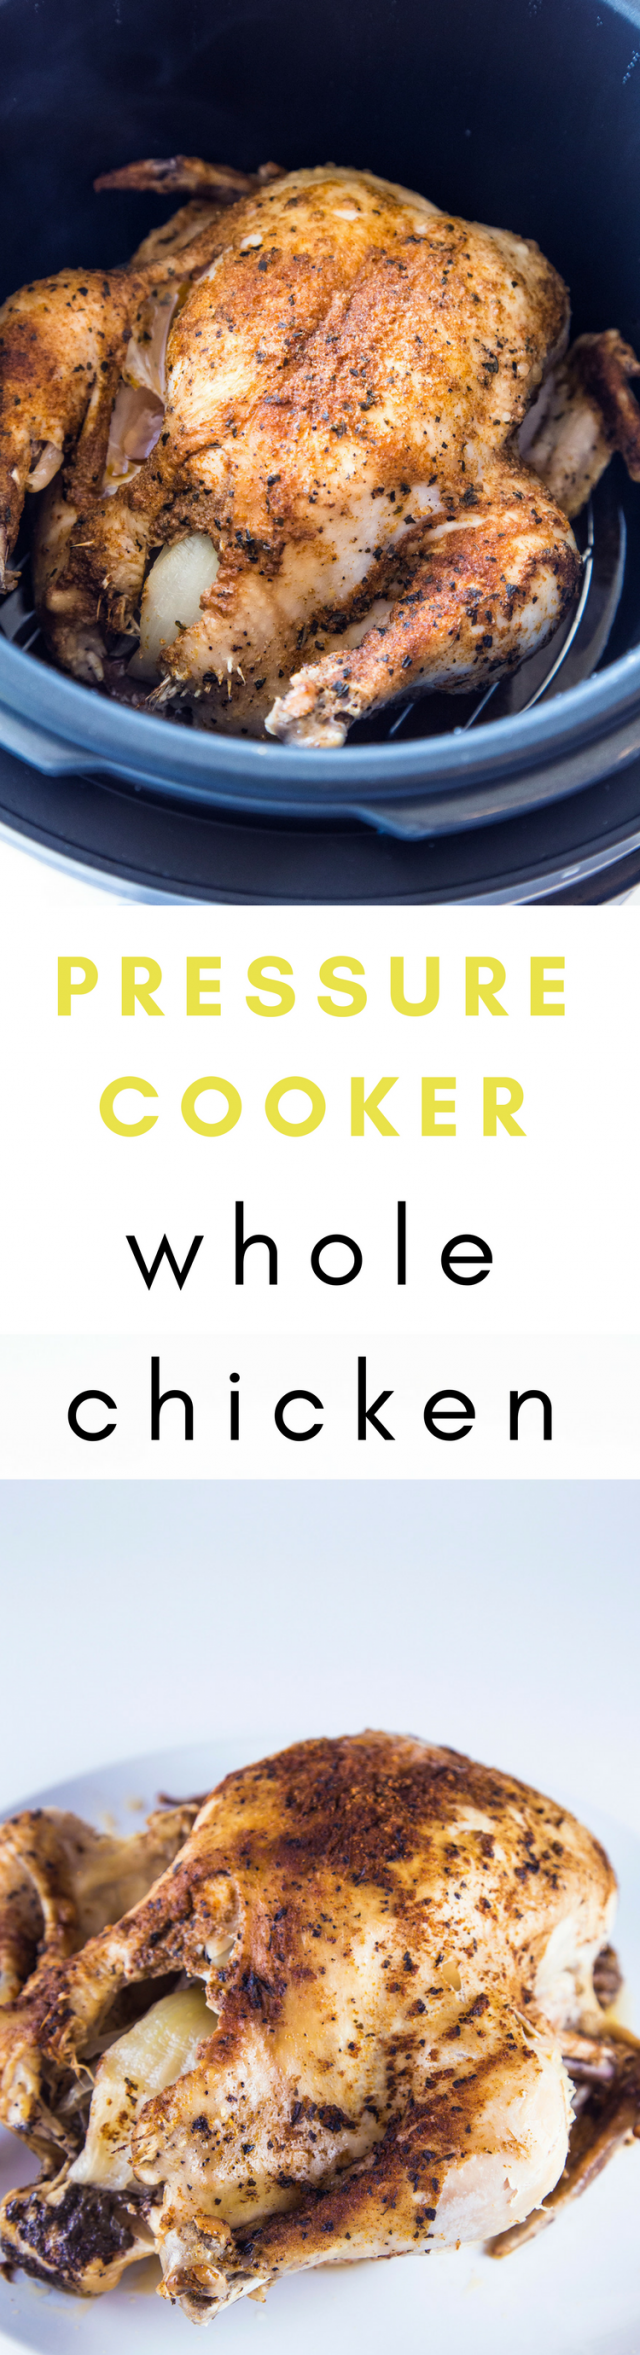 A whole chicken covered with olive oil and flavorful spices, stuffed with onion and garlic, then cooked rotisserie-style in a pressure cooker. Crock Pot Multi-cooker or Instant Pot.